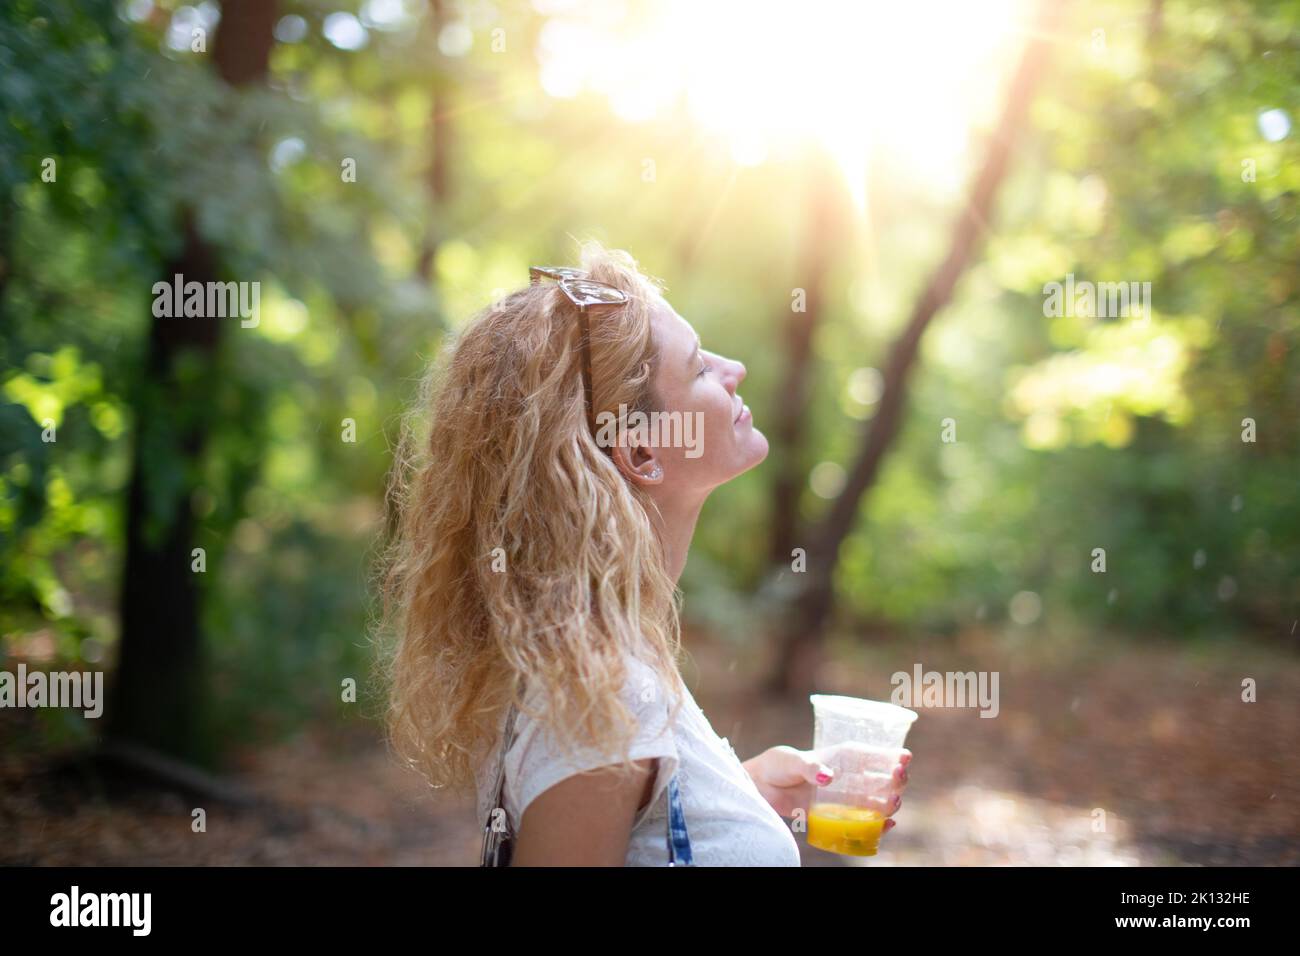 Carefree young woman enjoying sunshine after rain in nature, eyes closed Stock Photo